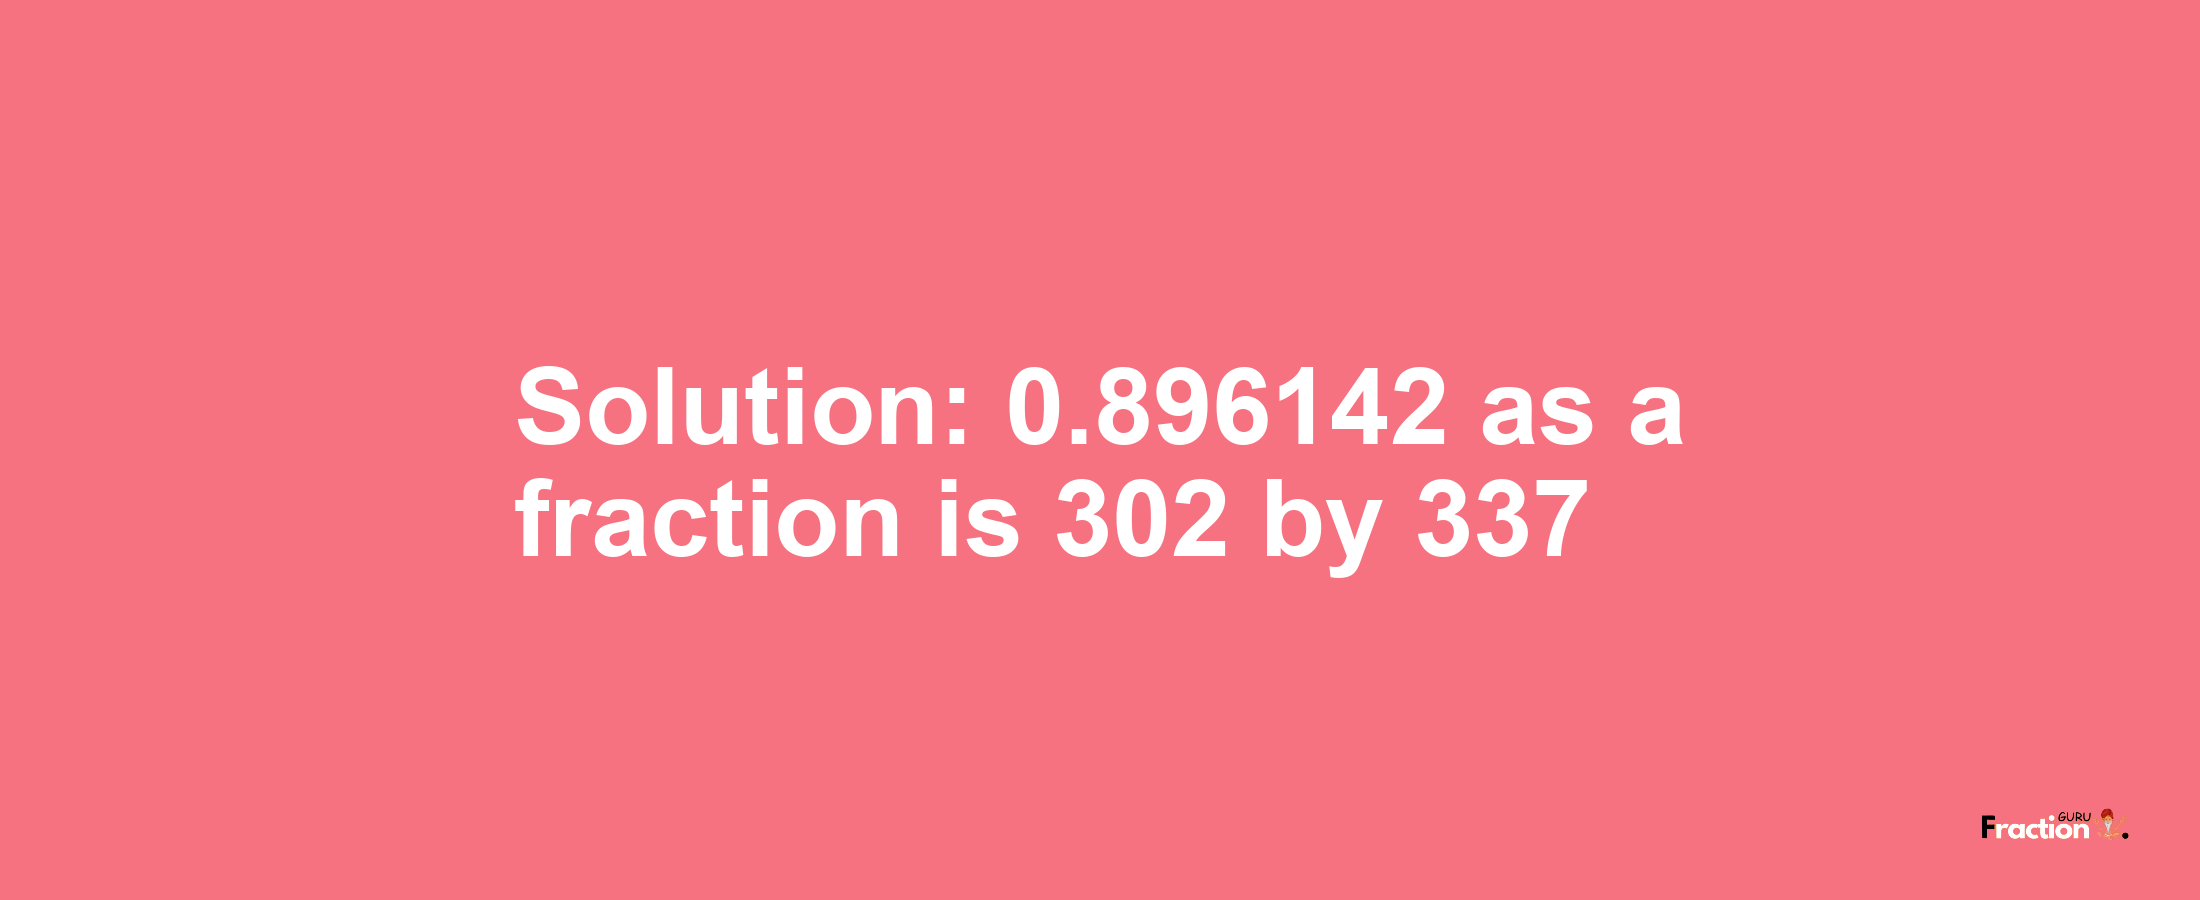 Solution:0.896142 as a fraction is 302/337